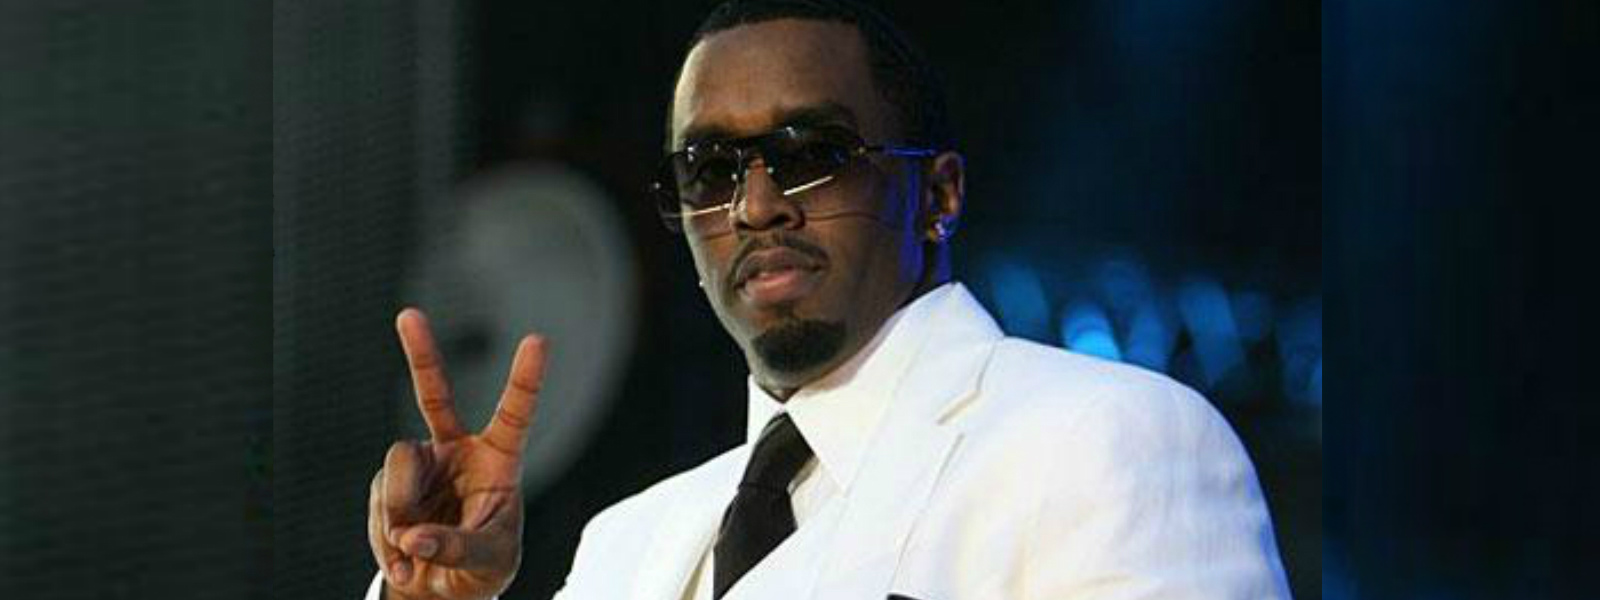 Rapper Diddy buys $21.1m painting